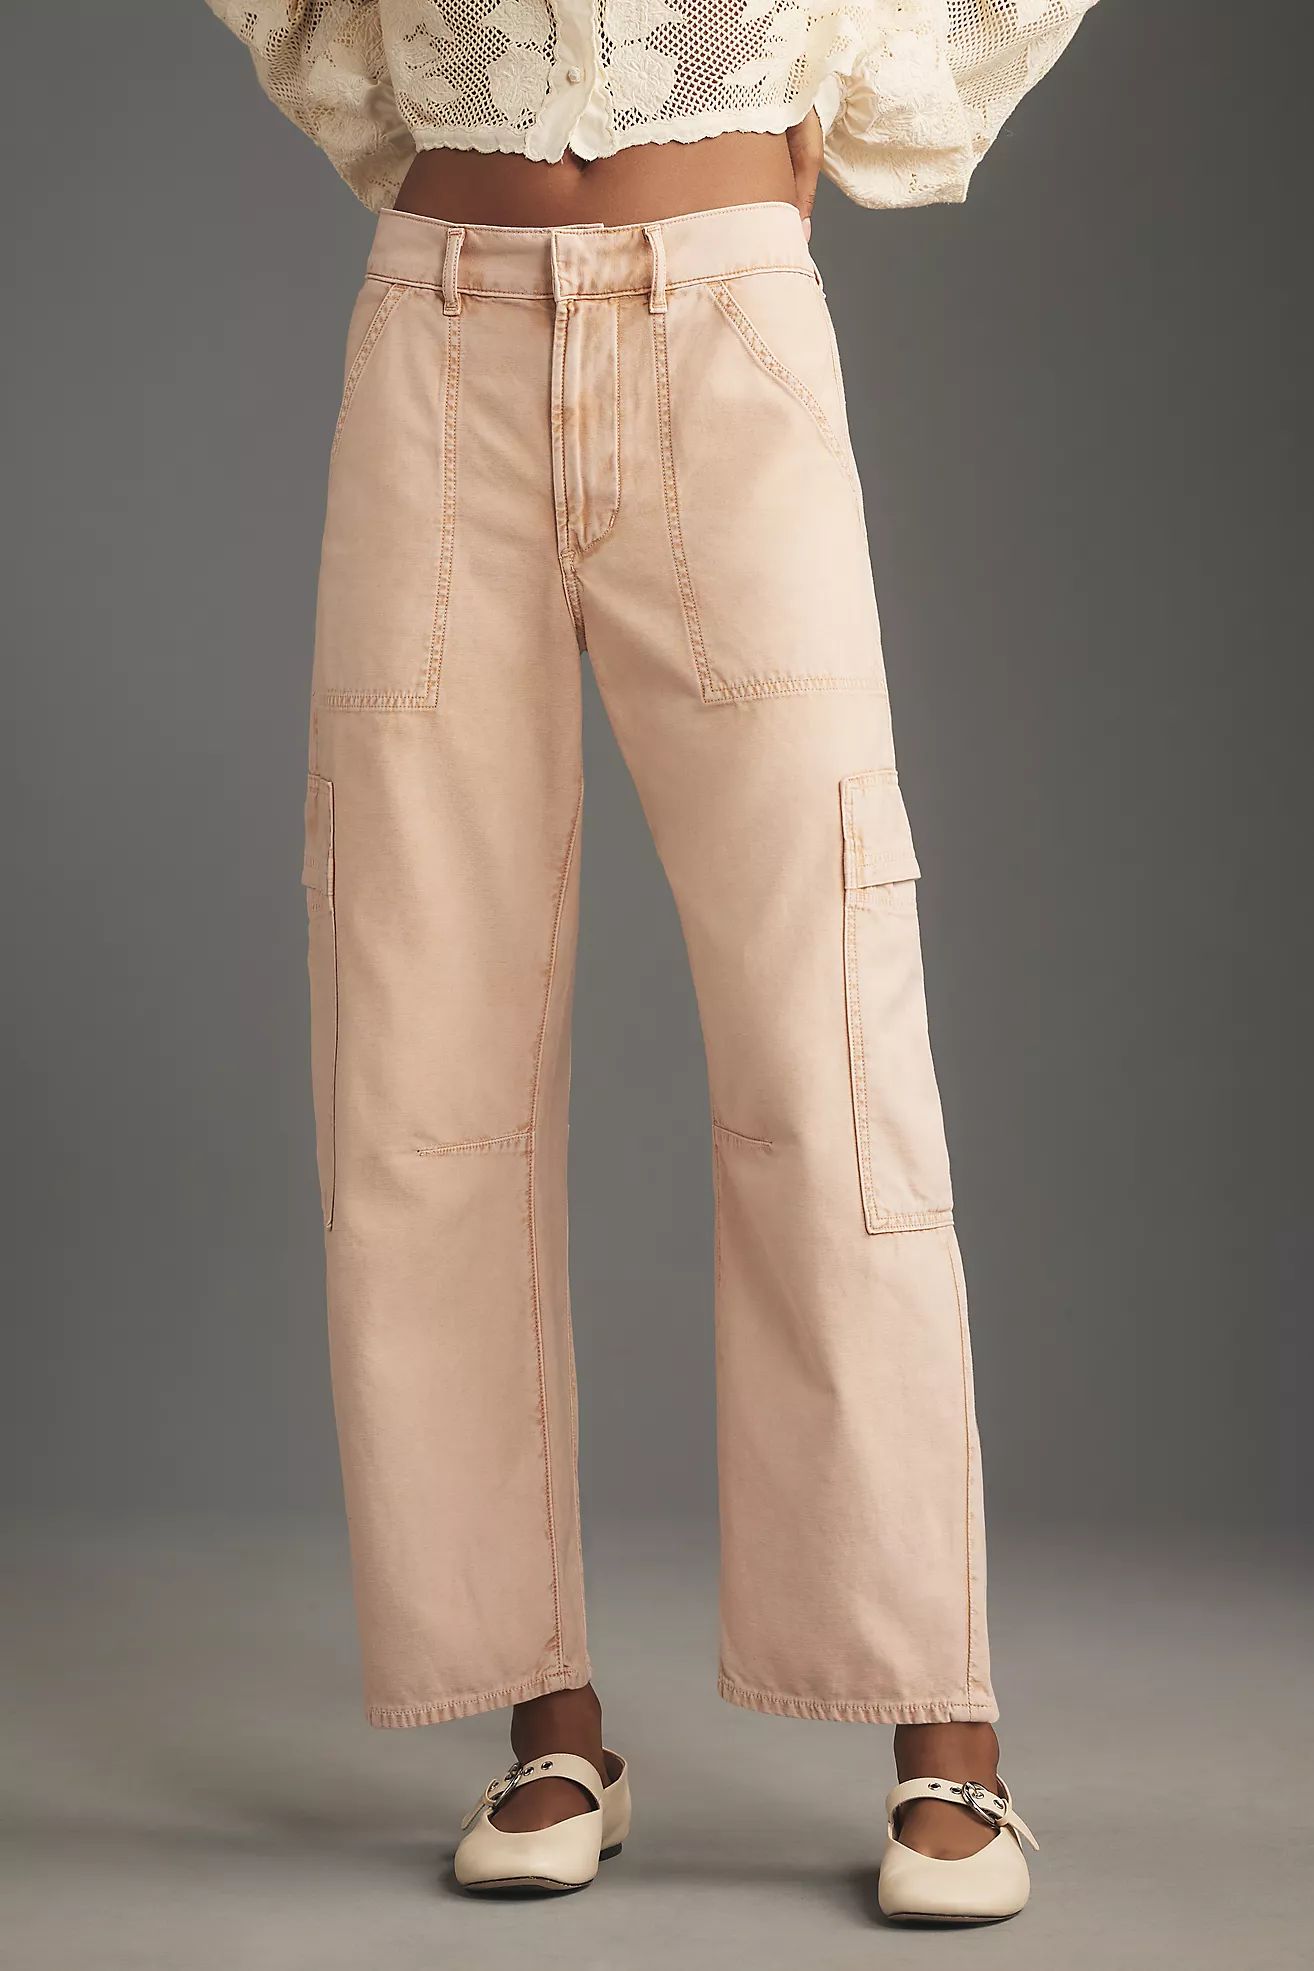 Citizens of Humanity Marcelle Cargo Barrel Pants | Anthropologie (US)